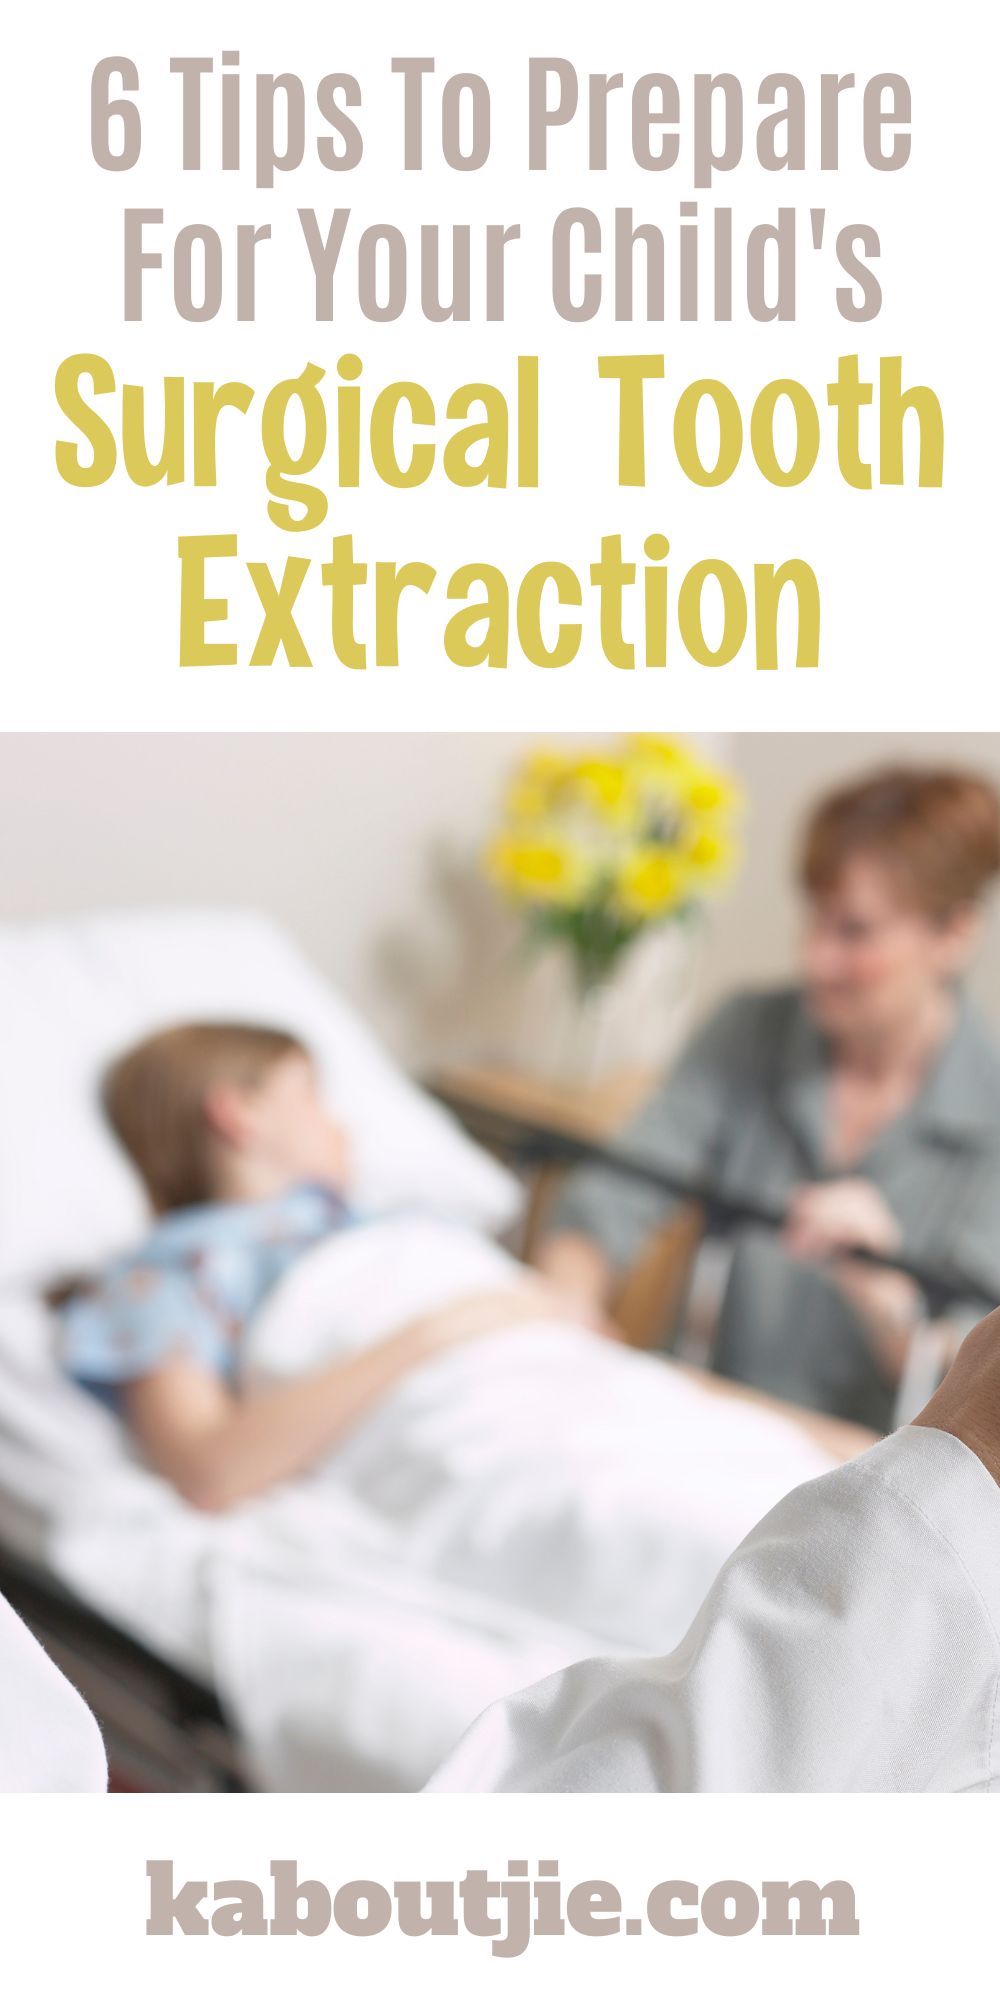 6 Tips To Prepare For Your Child's Surgical Tooth Extraction